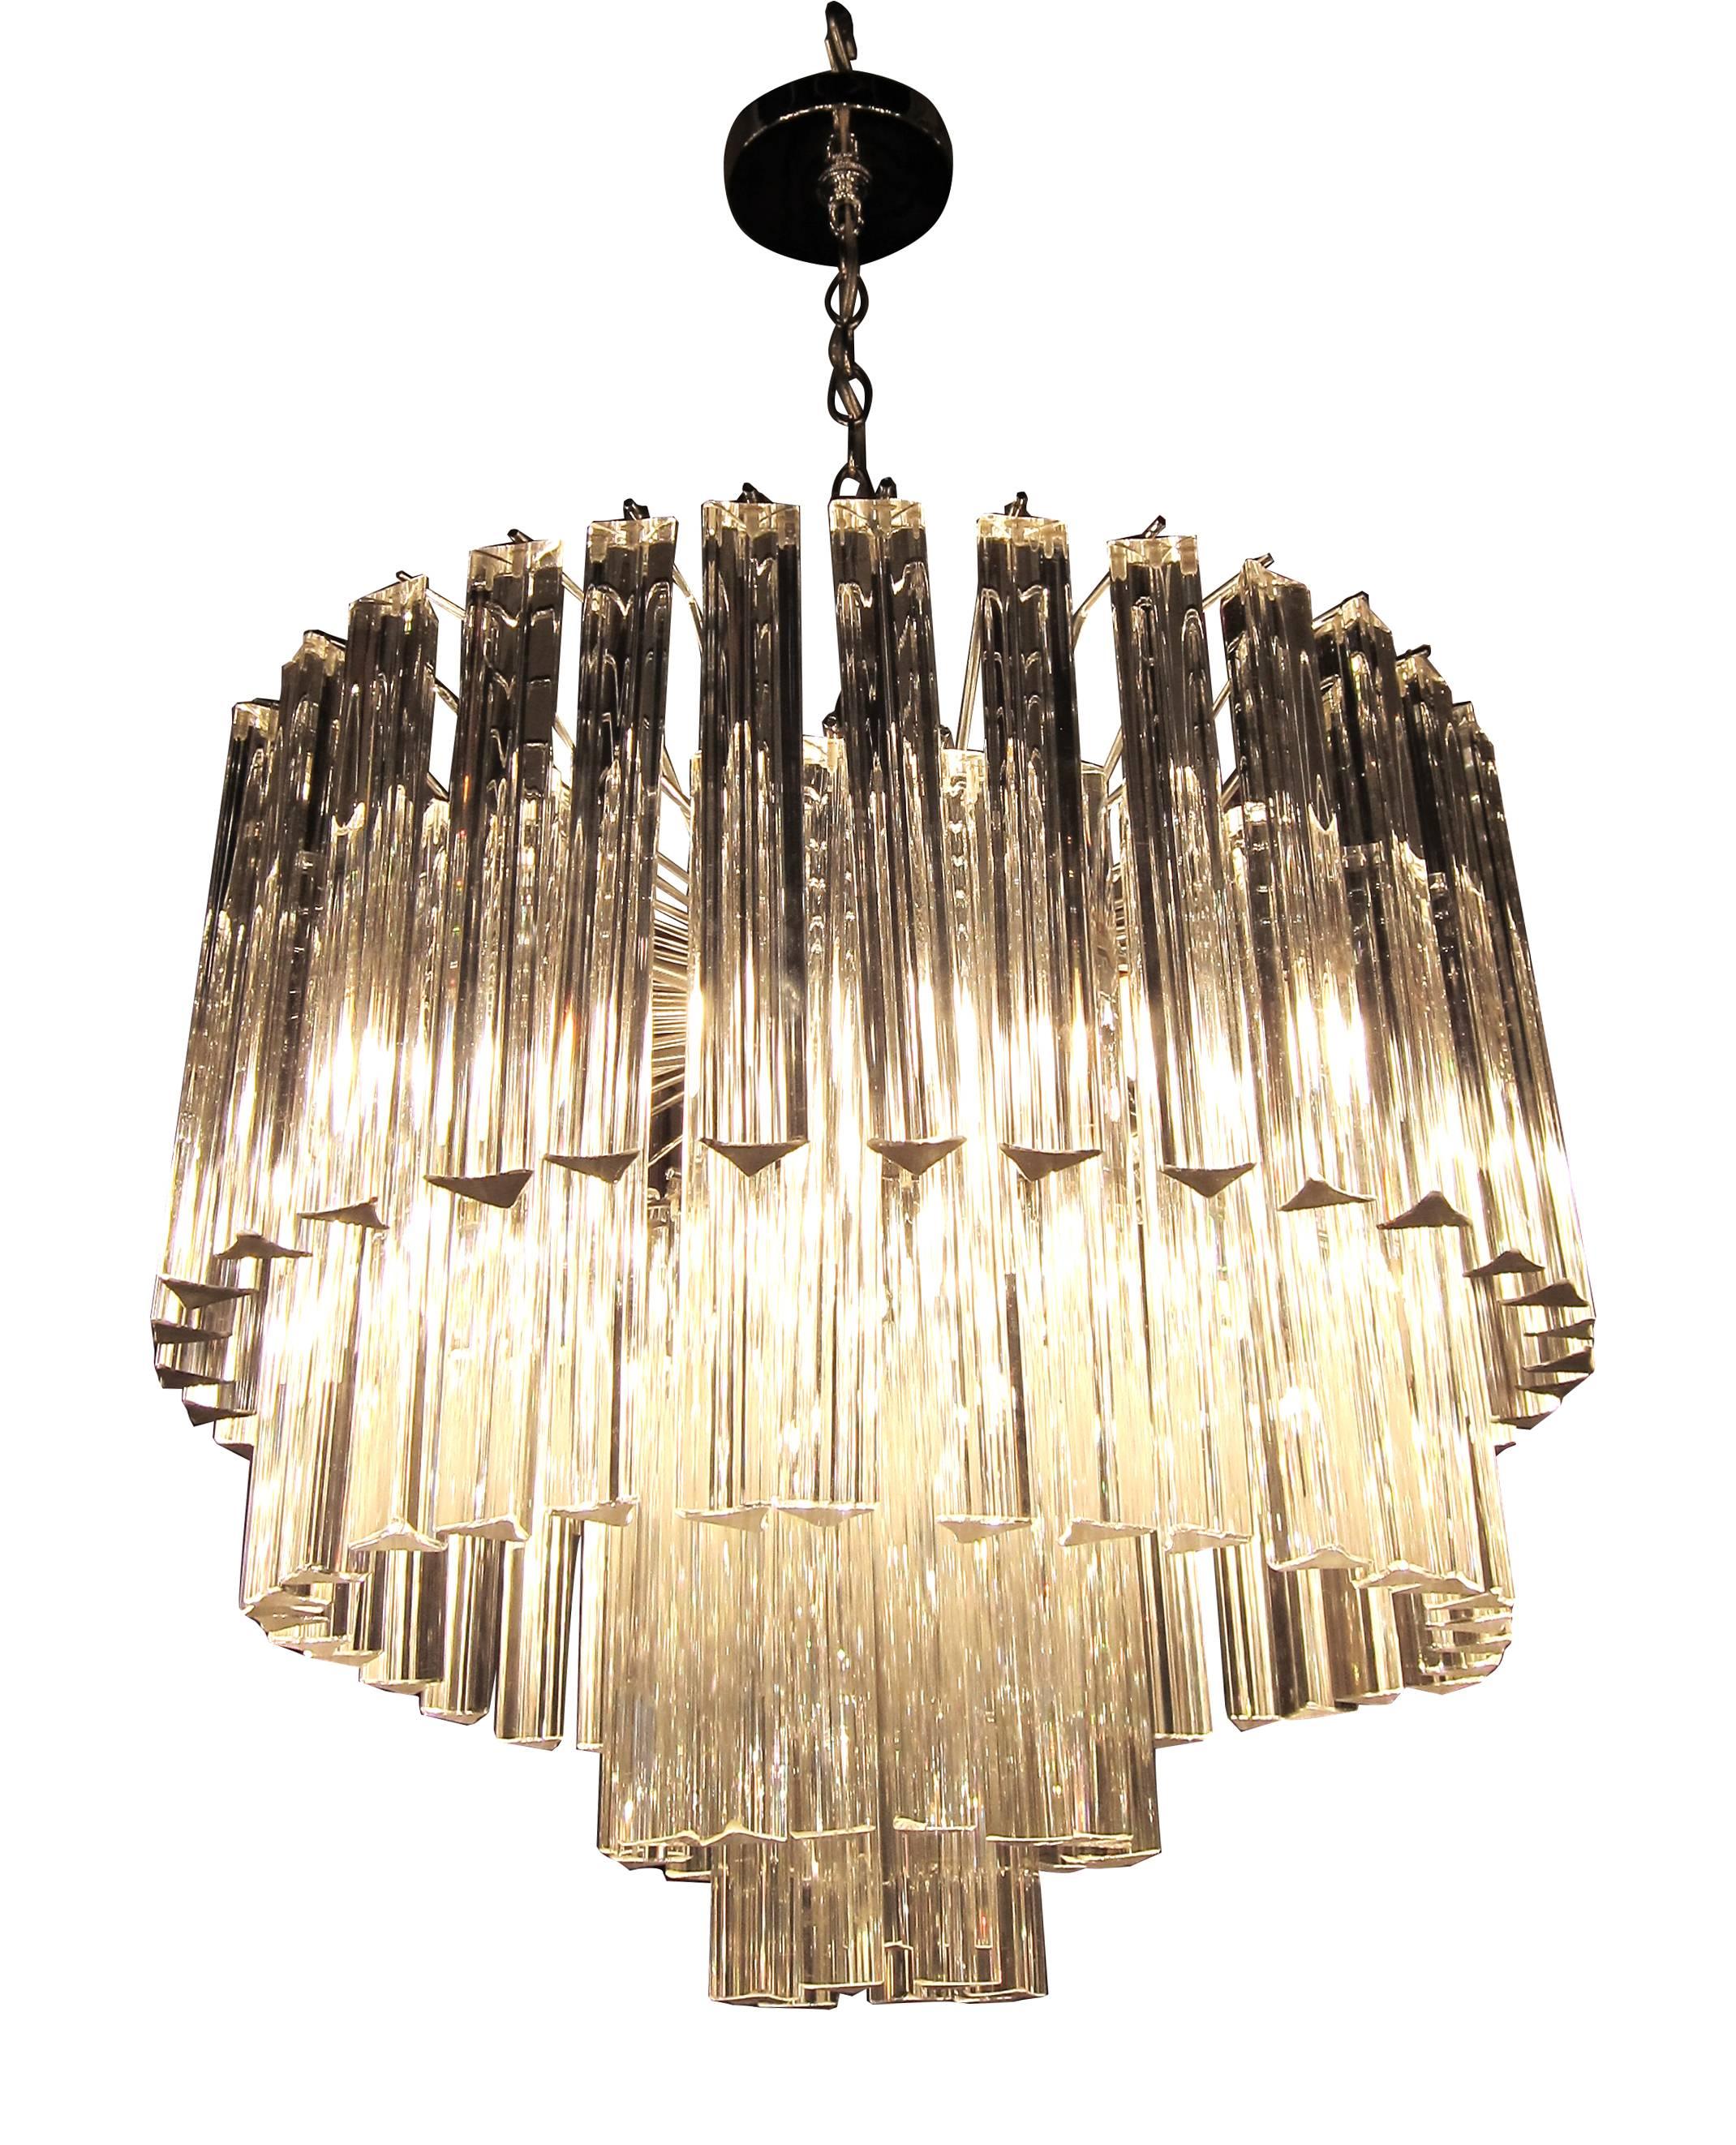 1960s Mid-Century Modern nickeled Venini four-tier crystal chandelier. This item can be viewed at our 149 Madison Avenue location in Manhattan.